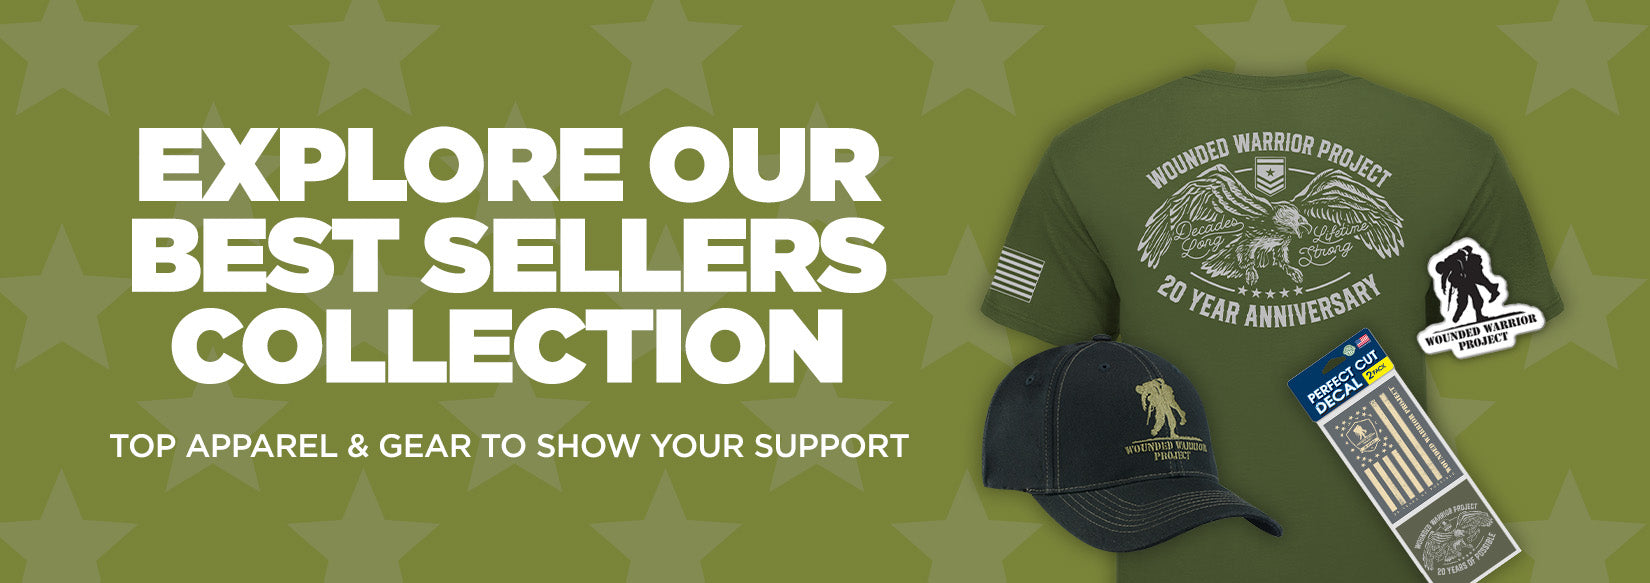 Explore Our Best Sellers Collection - Top Apparel & Gear to Show Your Support